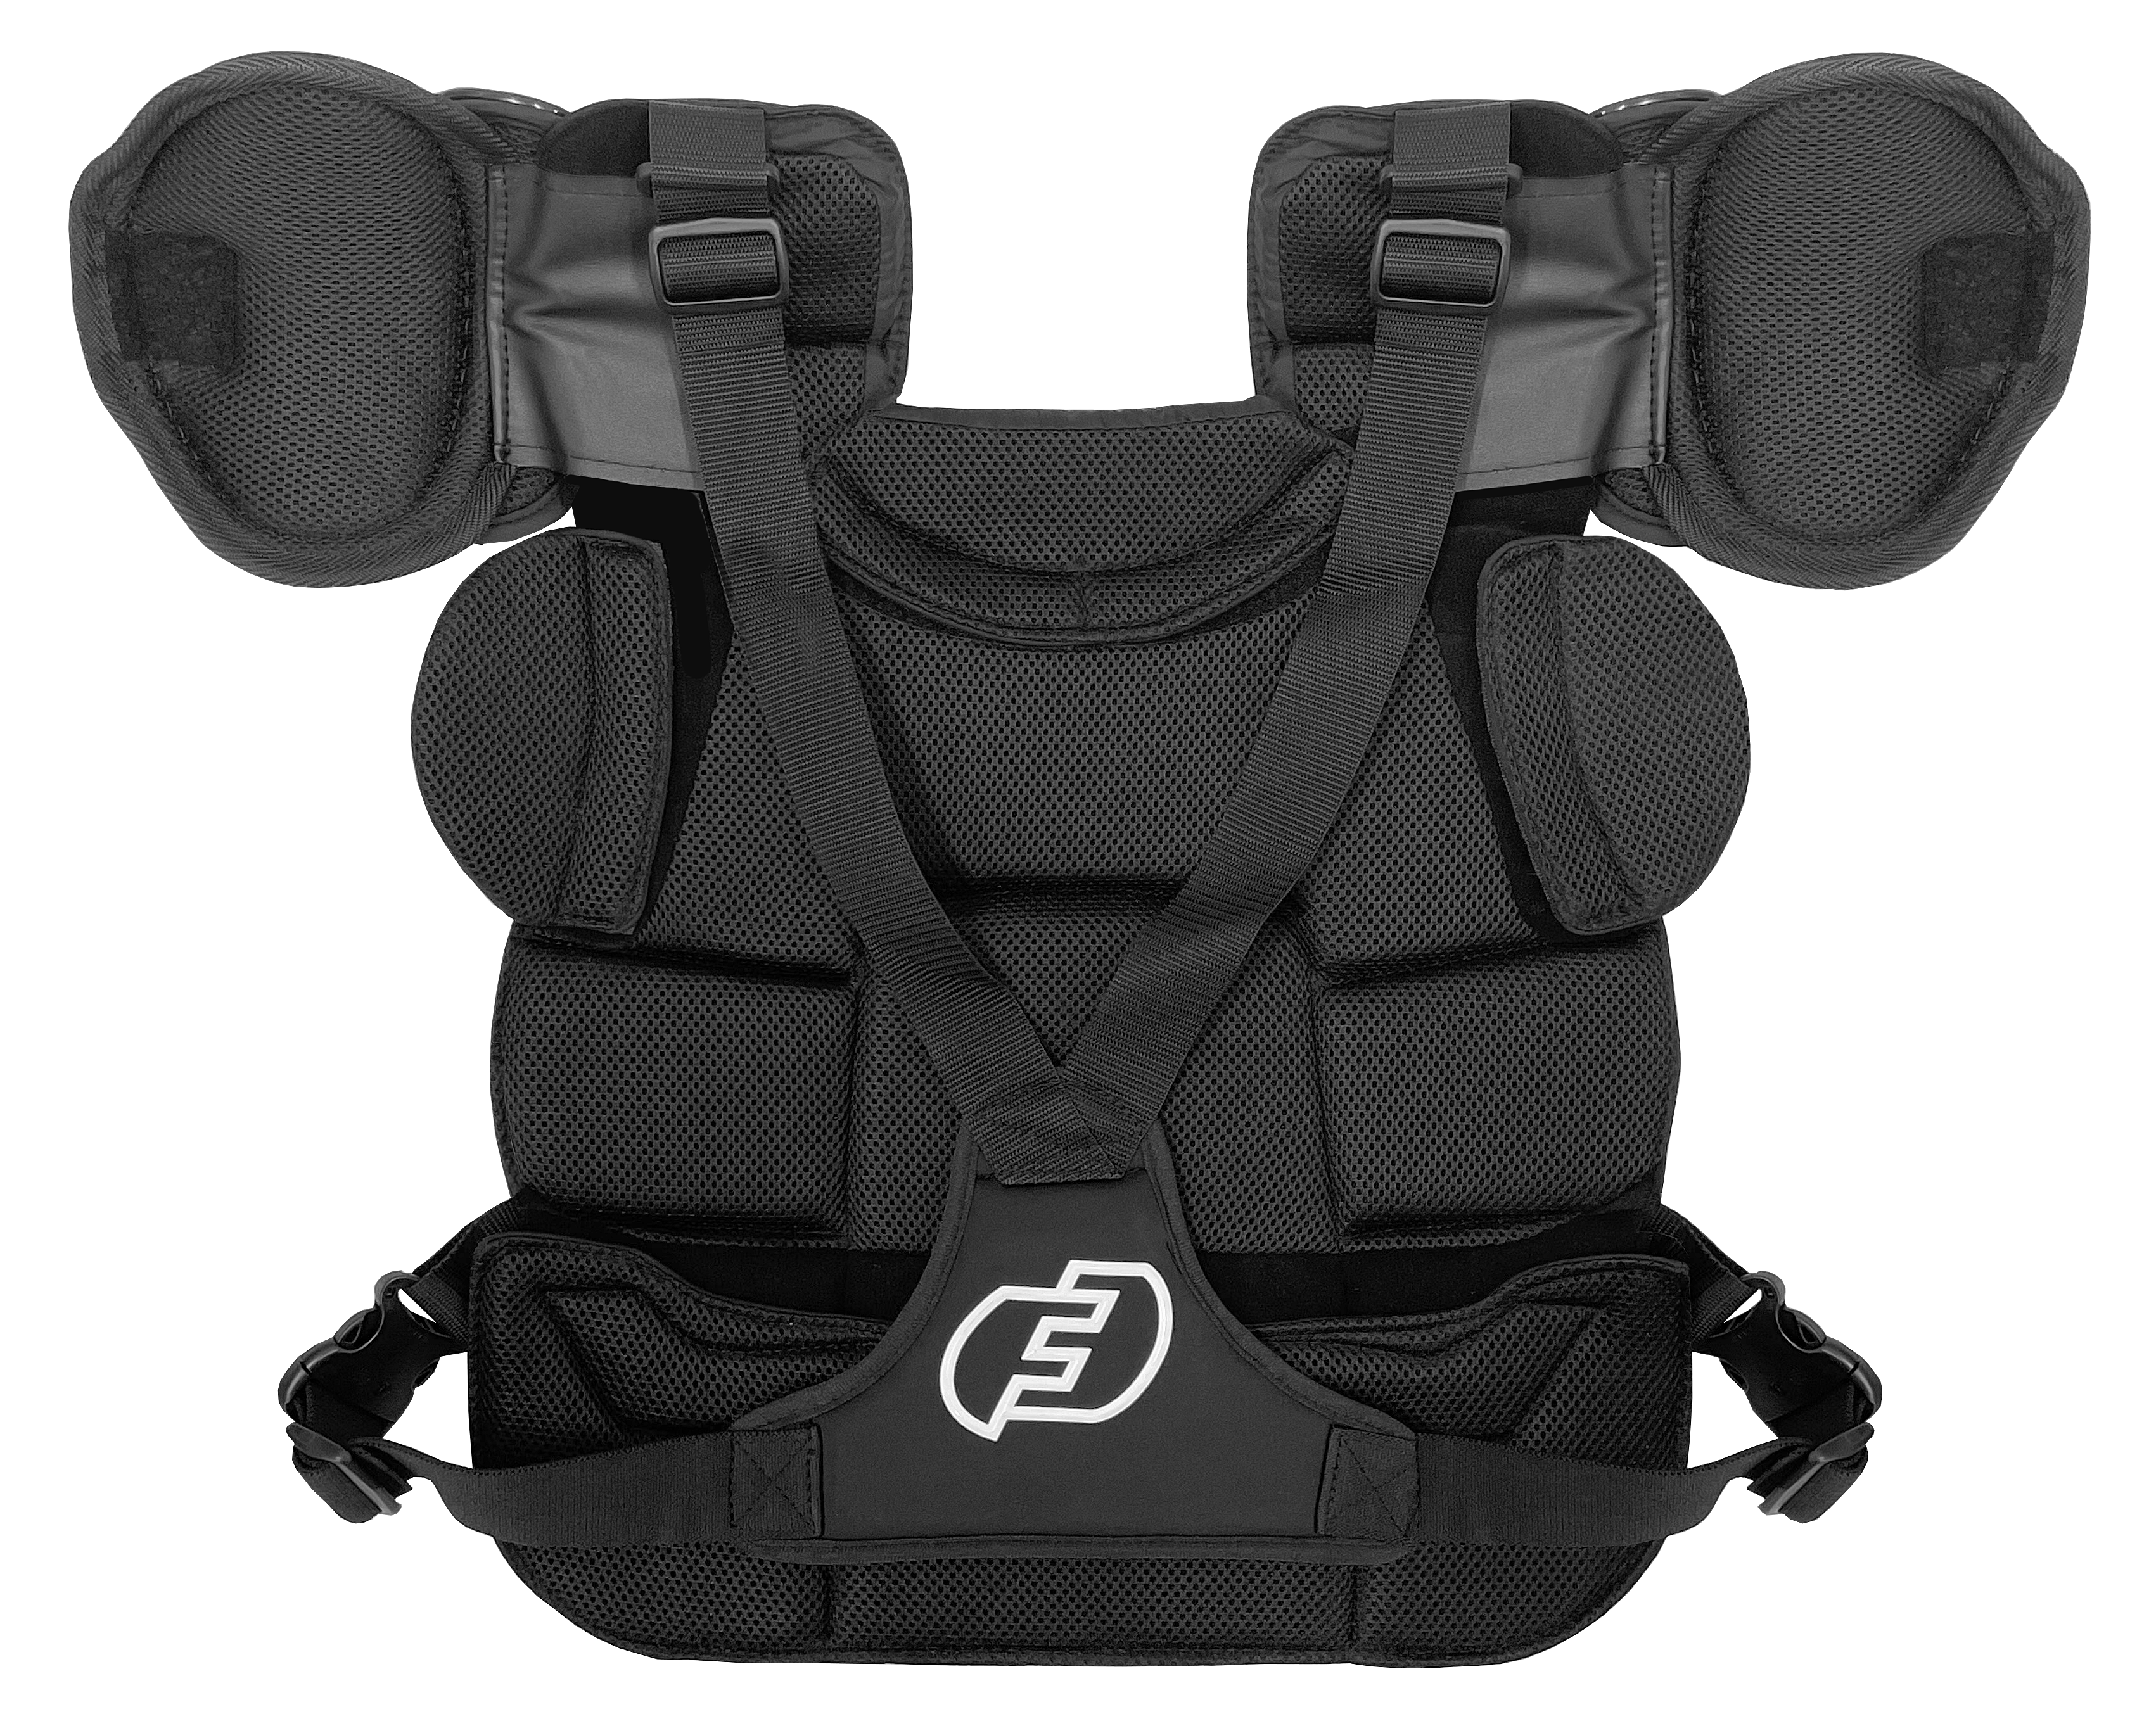 Ultimate Umpire Chest Protector with Dupont Kevlar